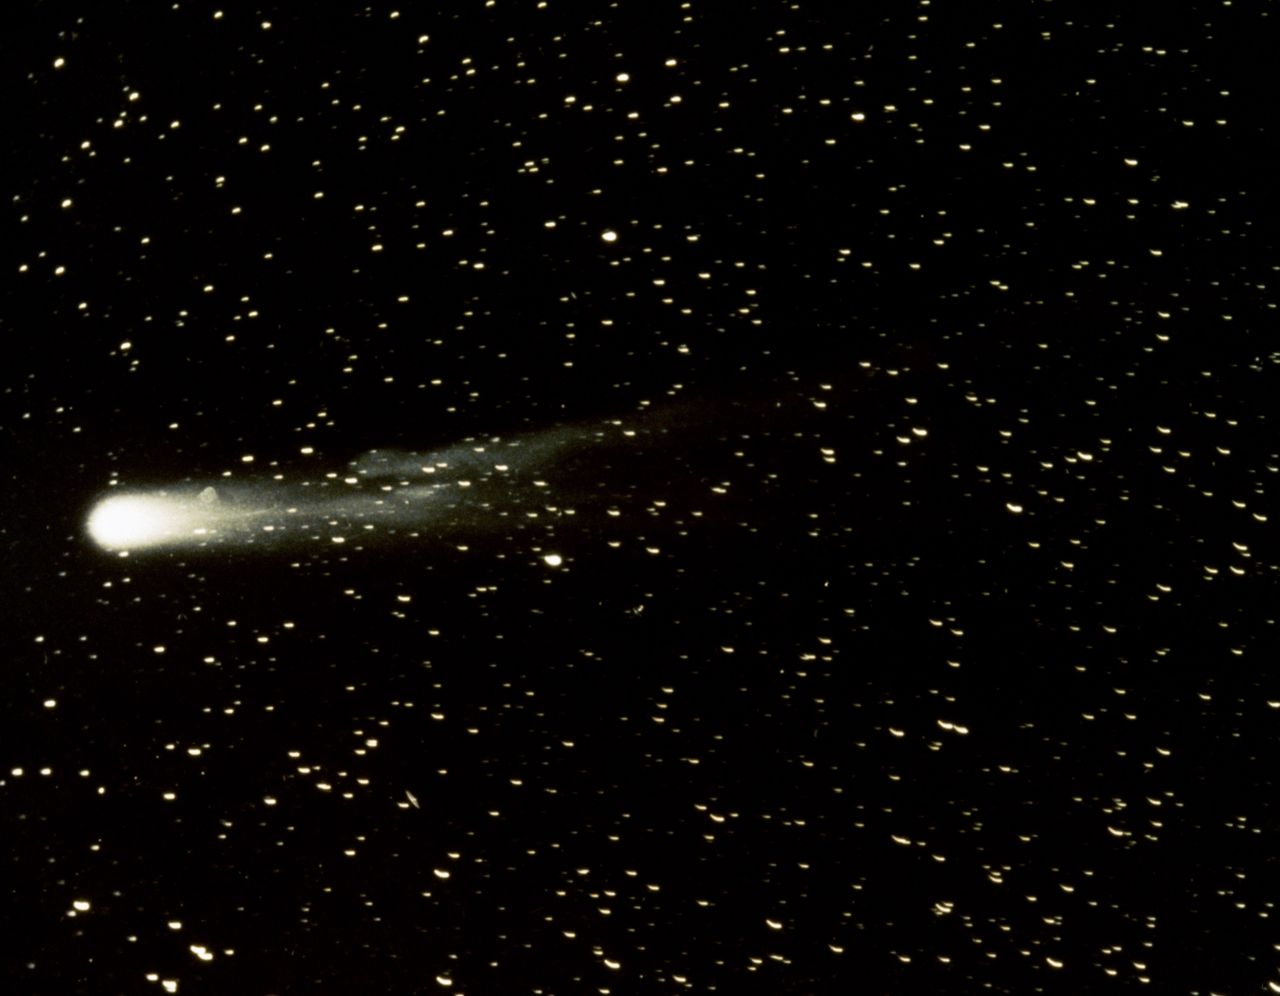 Return of Halley's Comet: New predictions by scientists